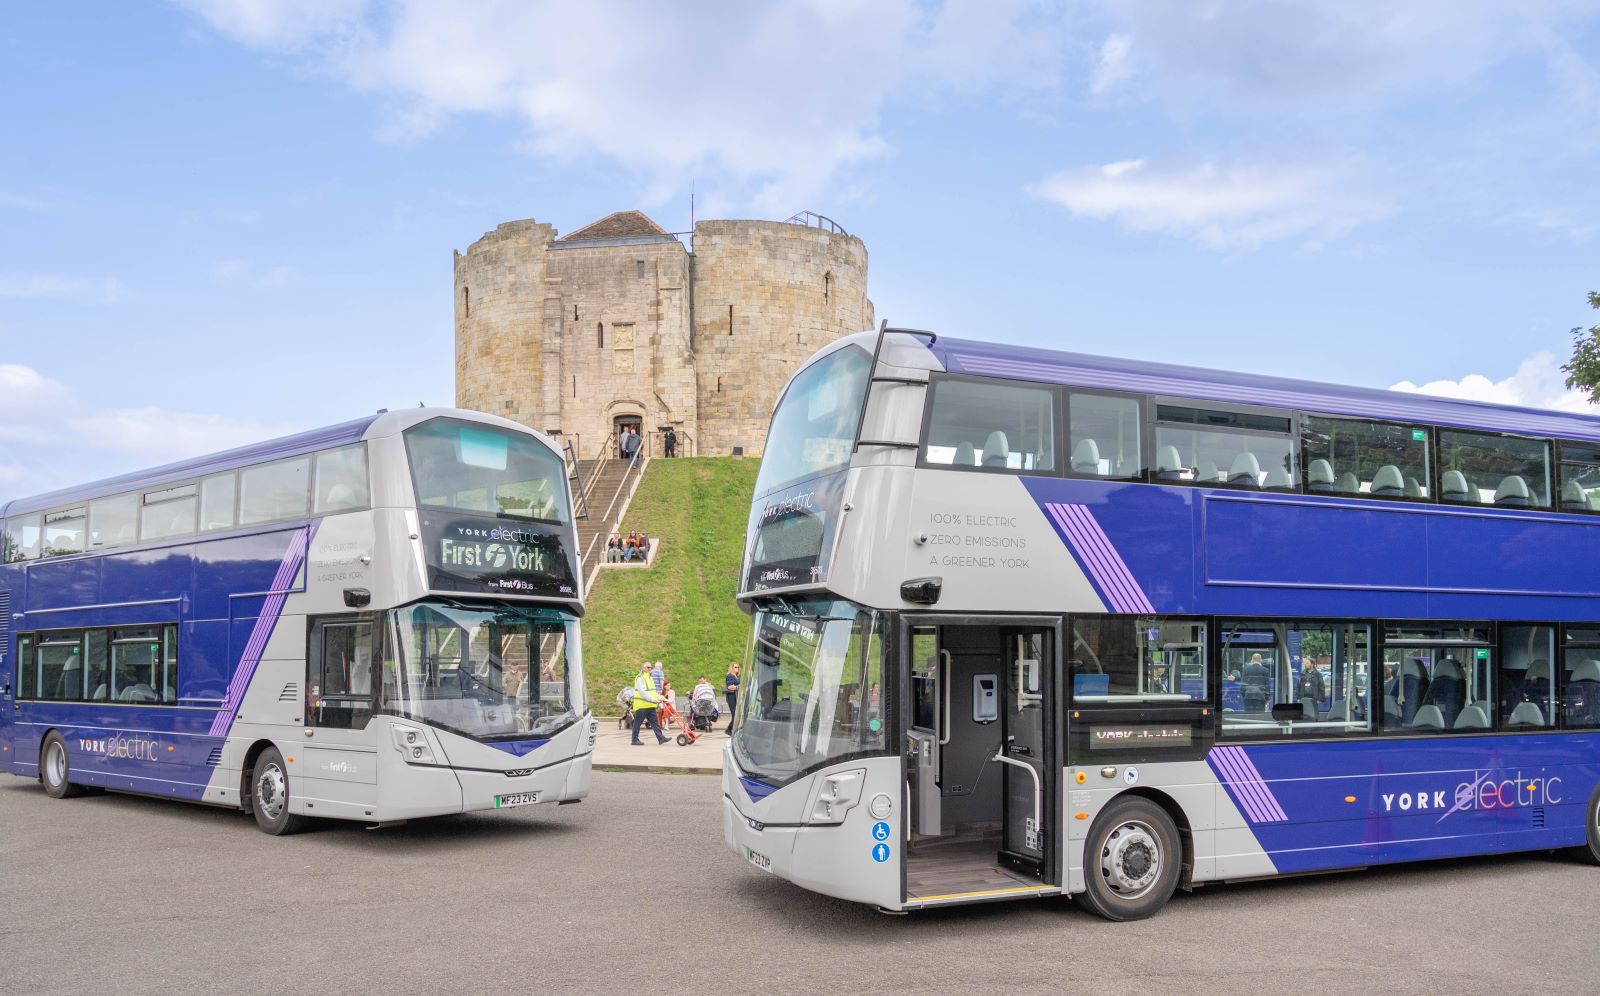 Wrightbus is set todeliver an ordered 1,000 electric and hydrogen buses this year